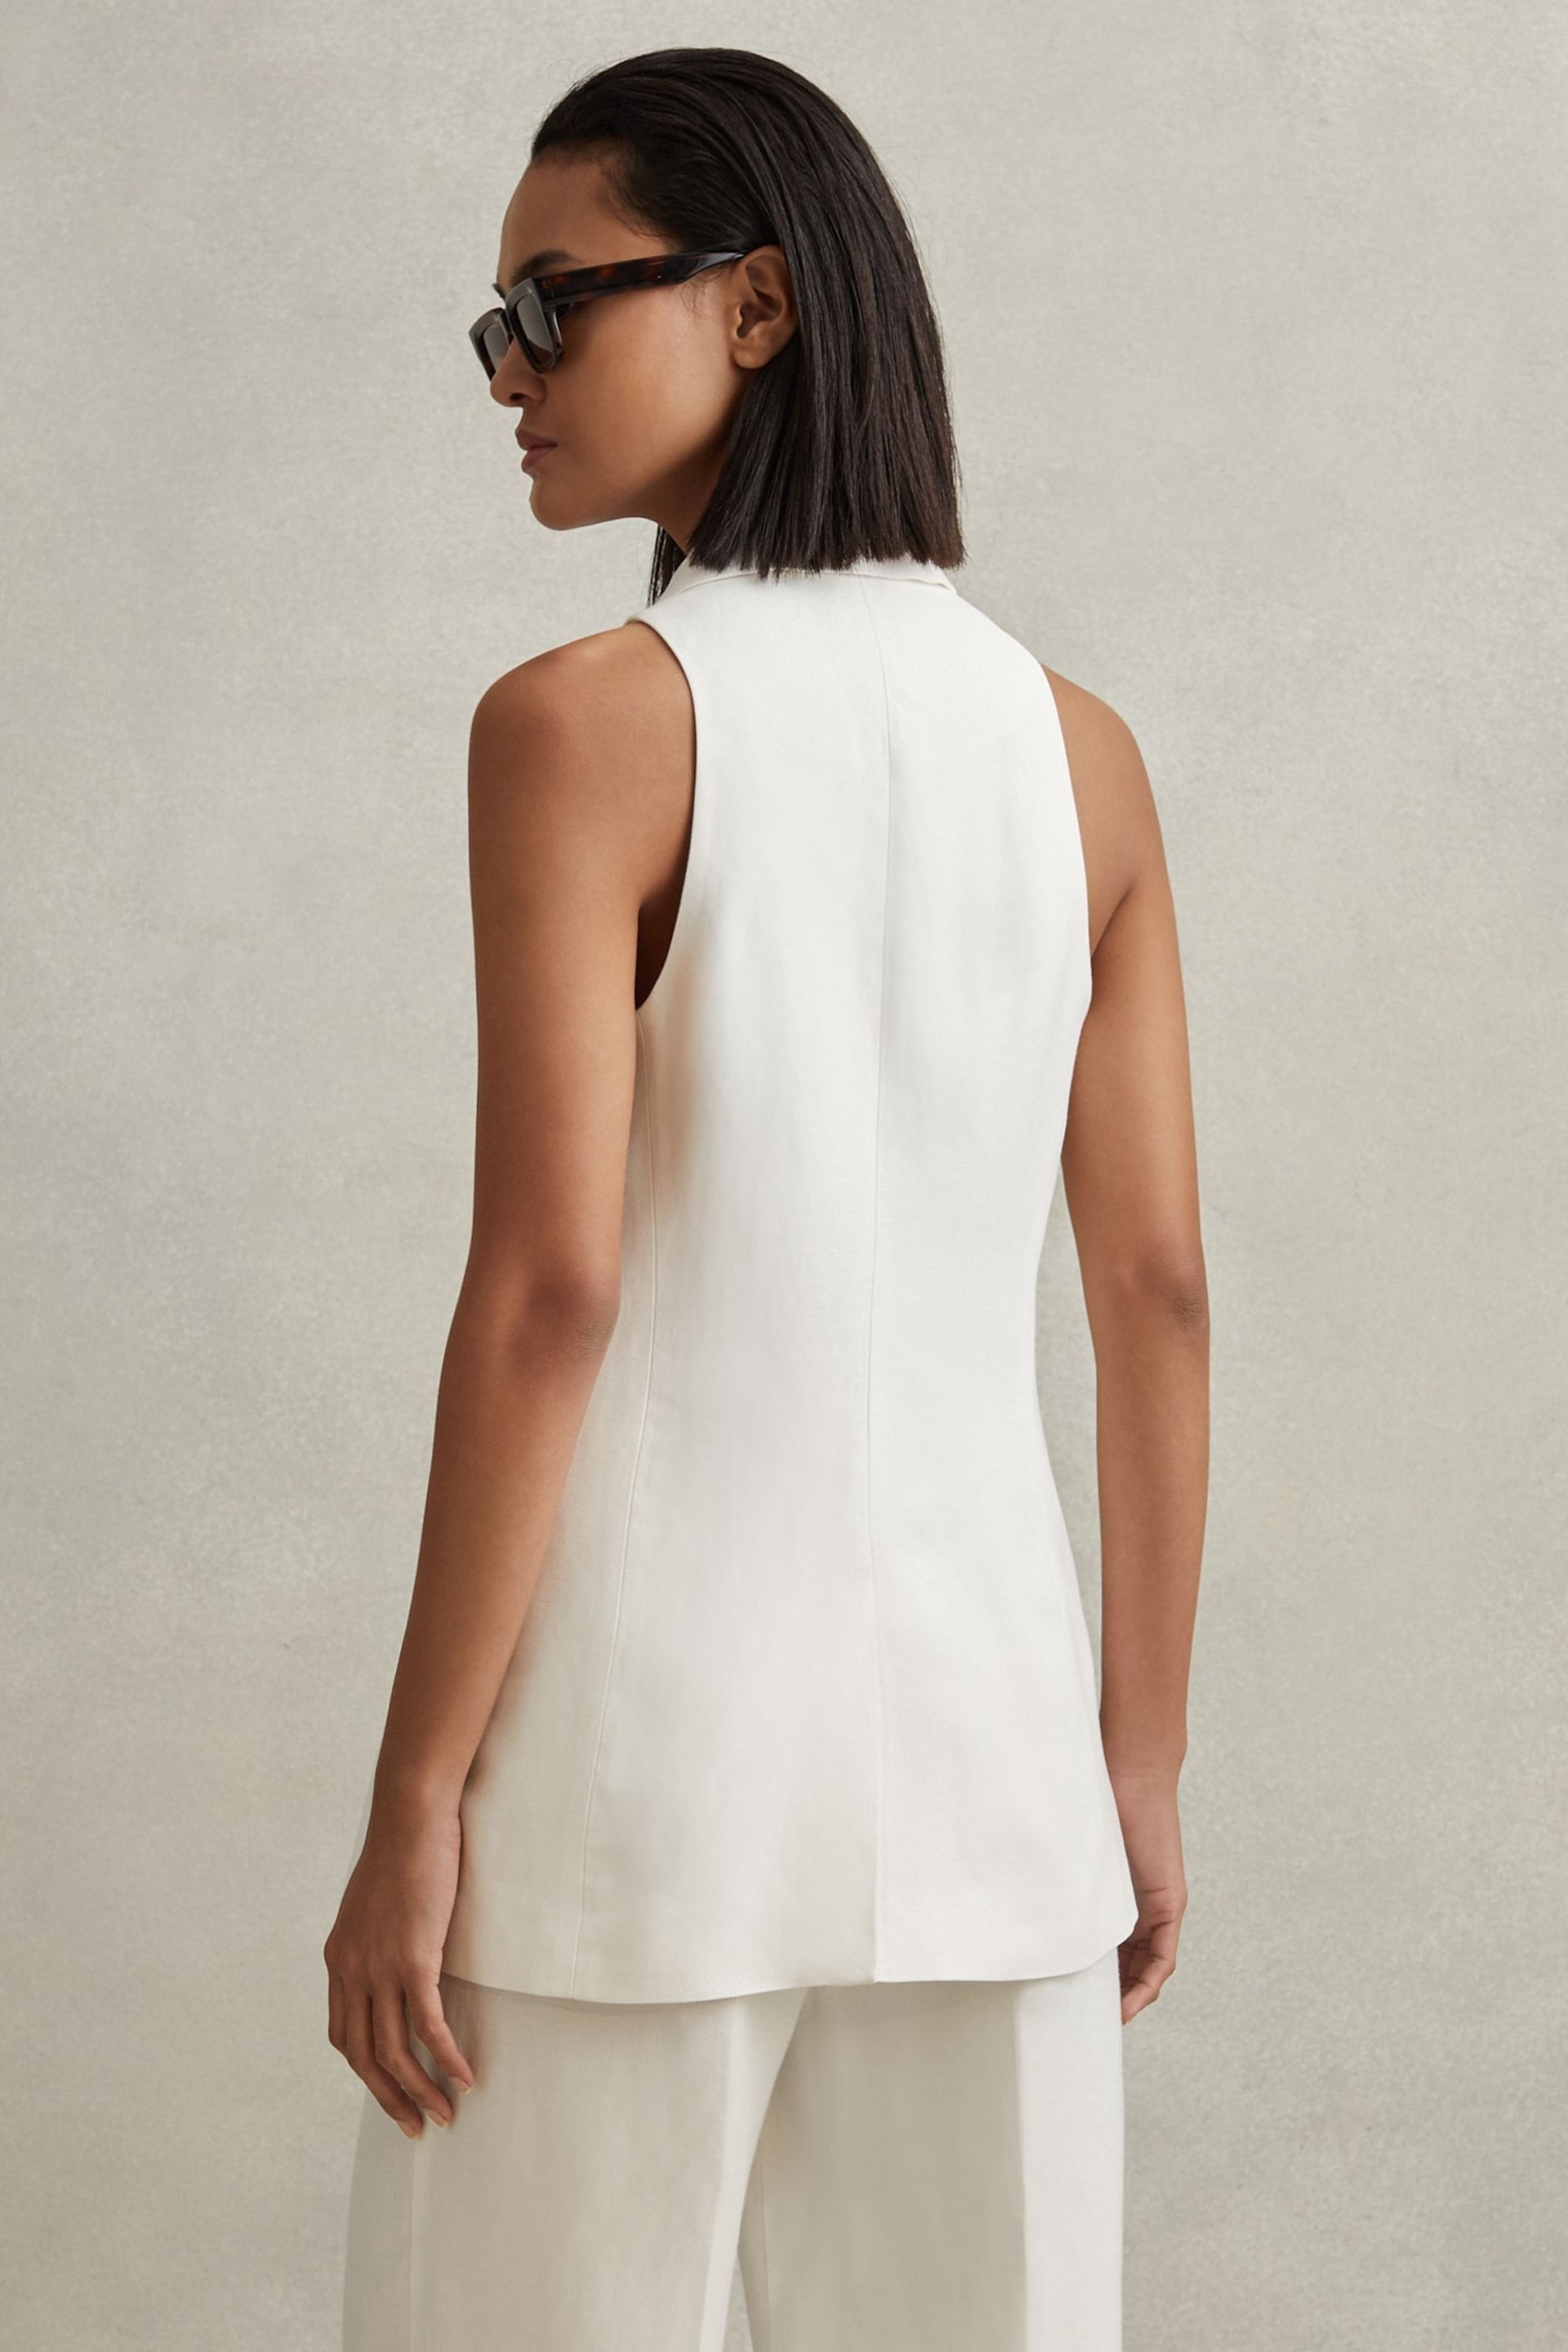 Reiss White Lori Halter Viscose Linen Double Breasted Suit Waistcoat - Image 4 of 6